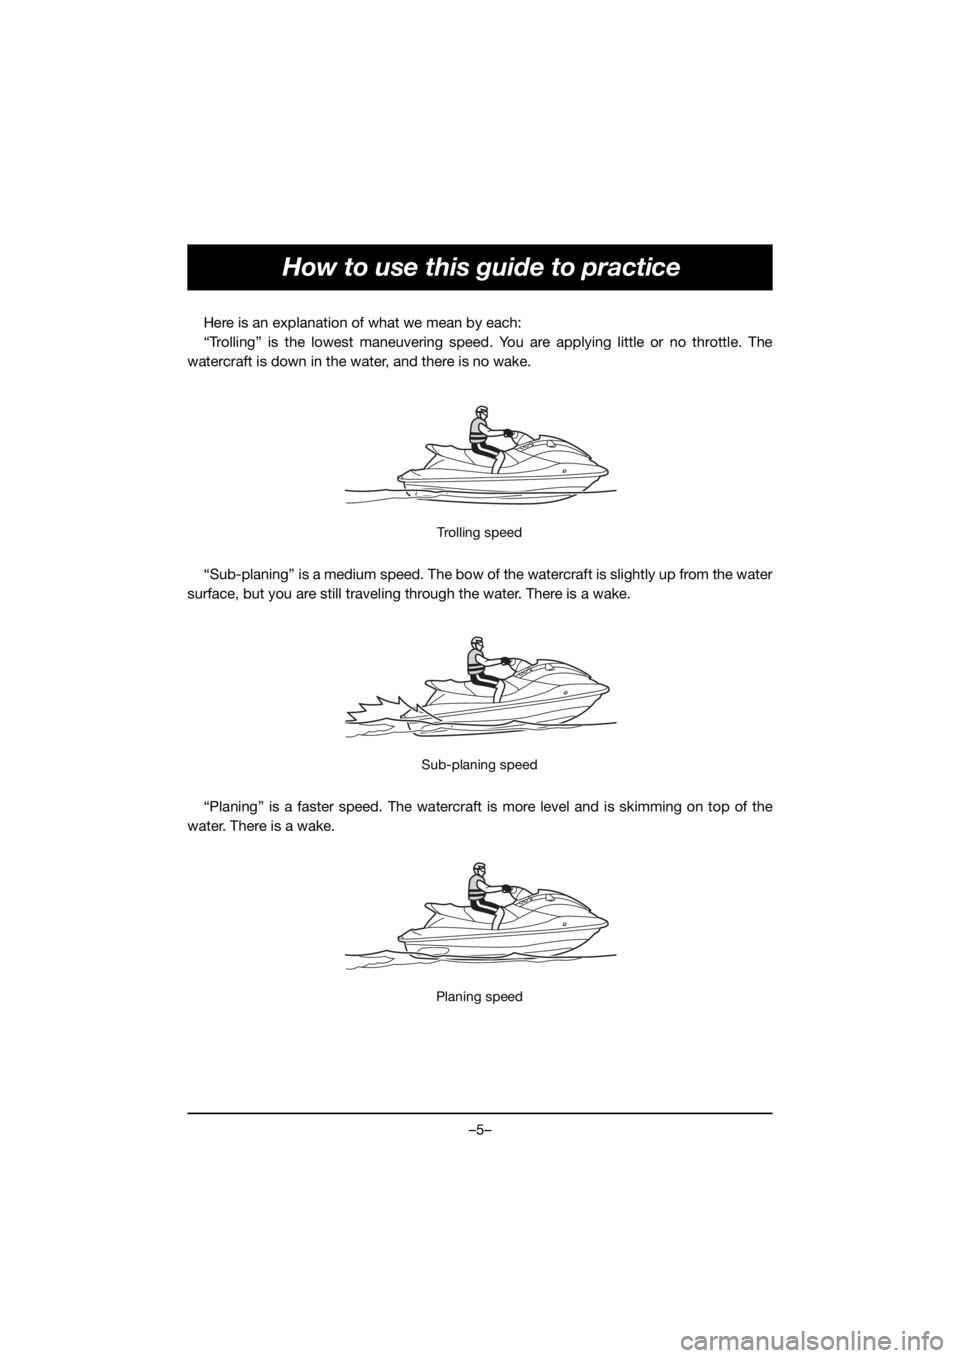 YAMAHA VX DELUXE 2021  Bruksanvisningar (in Swedish) –5–
How to use this guide to practice
Here is an explanation of what we mean by each:
“Trolling” is the lowest maneuvering speed. You are applying little or no throttle. The
watercraft is down